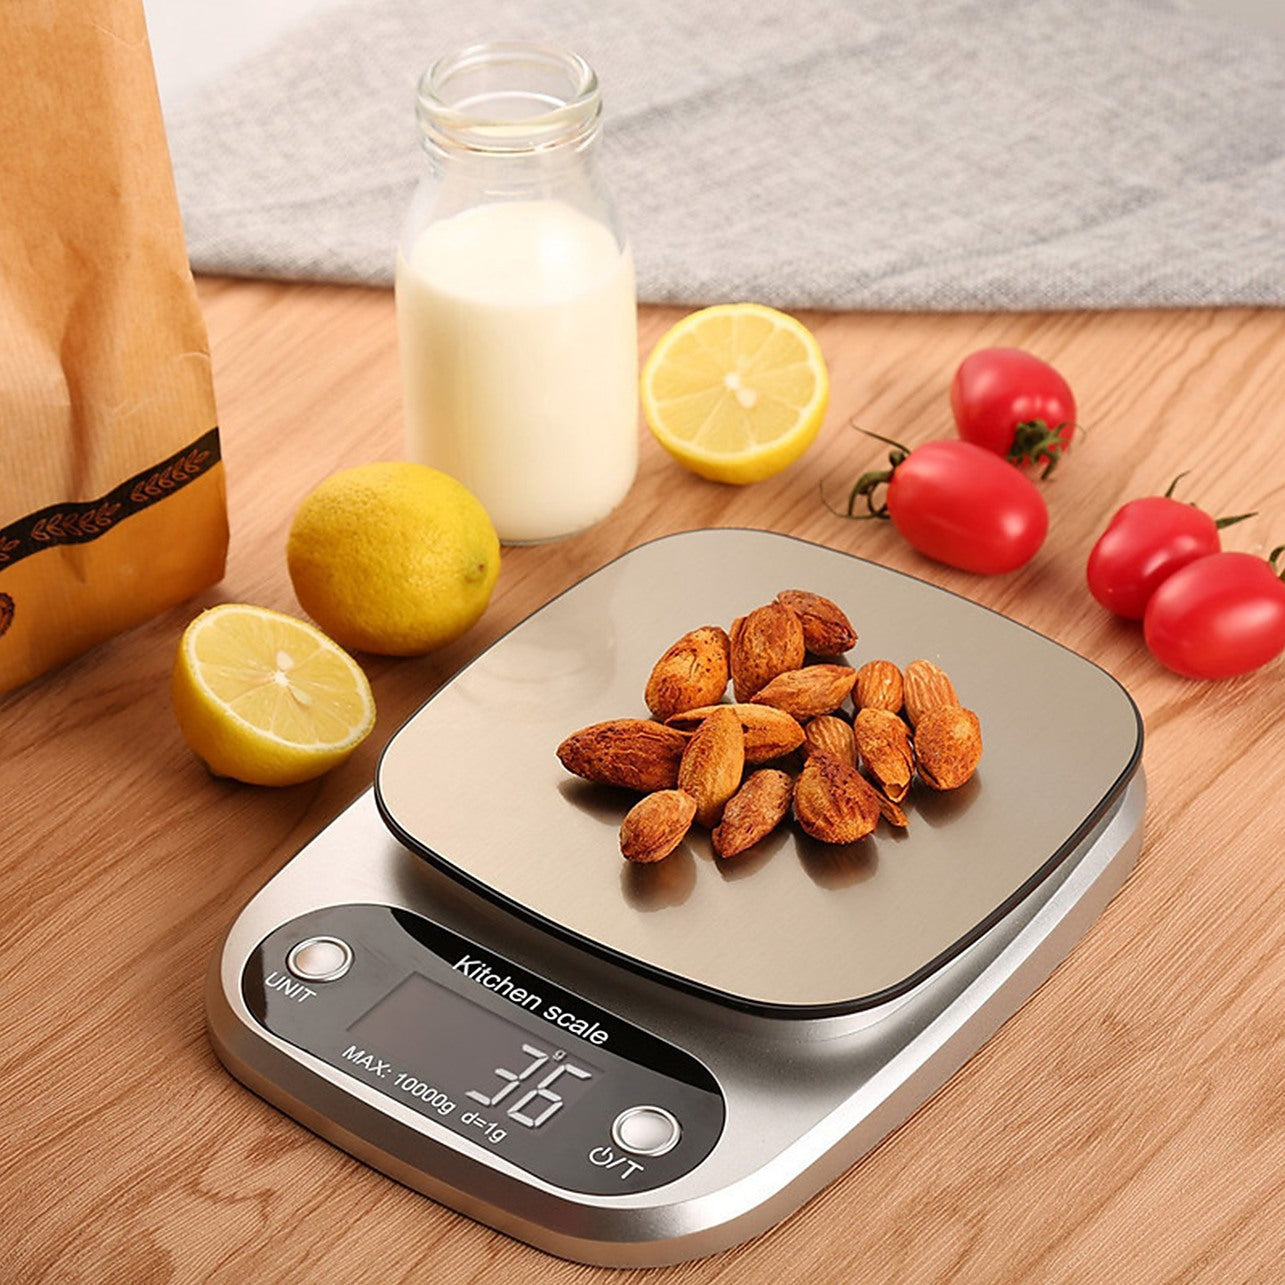 Digital Weight Kitchen Scales 5kg 10kg Accuracy 1g Precision